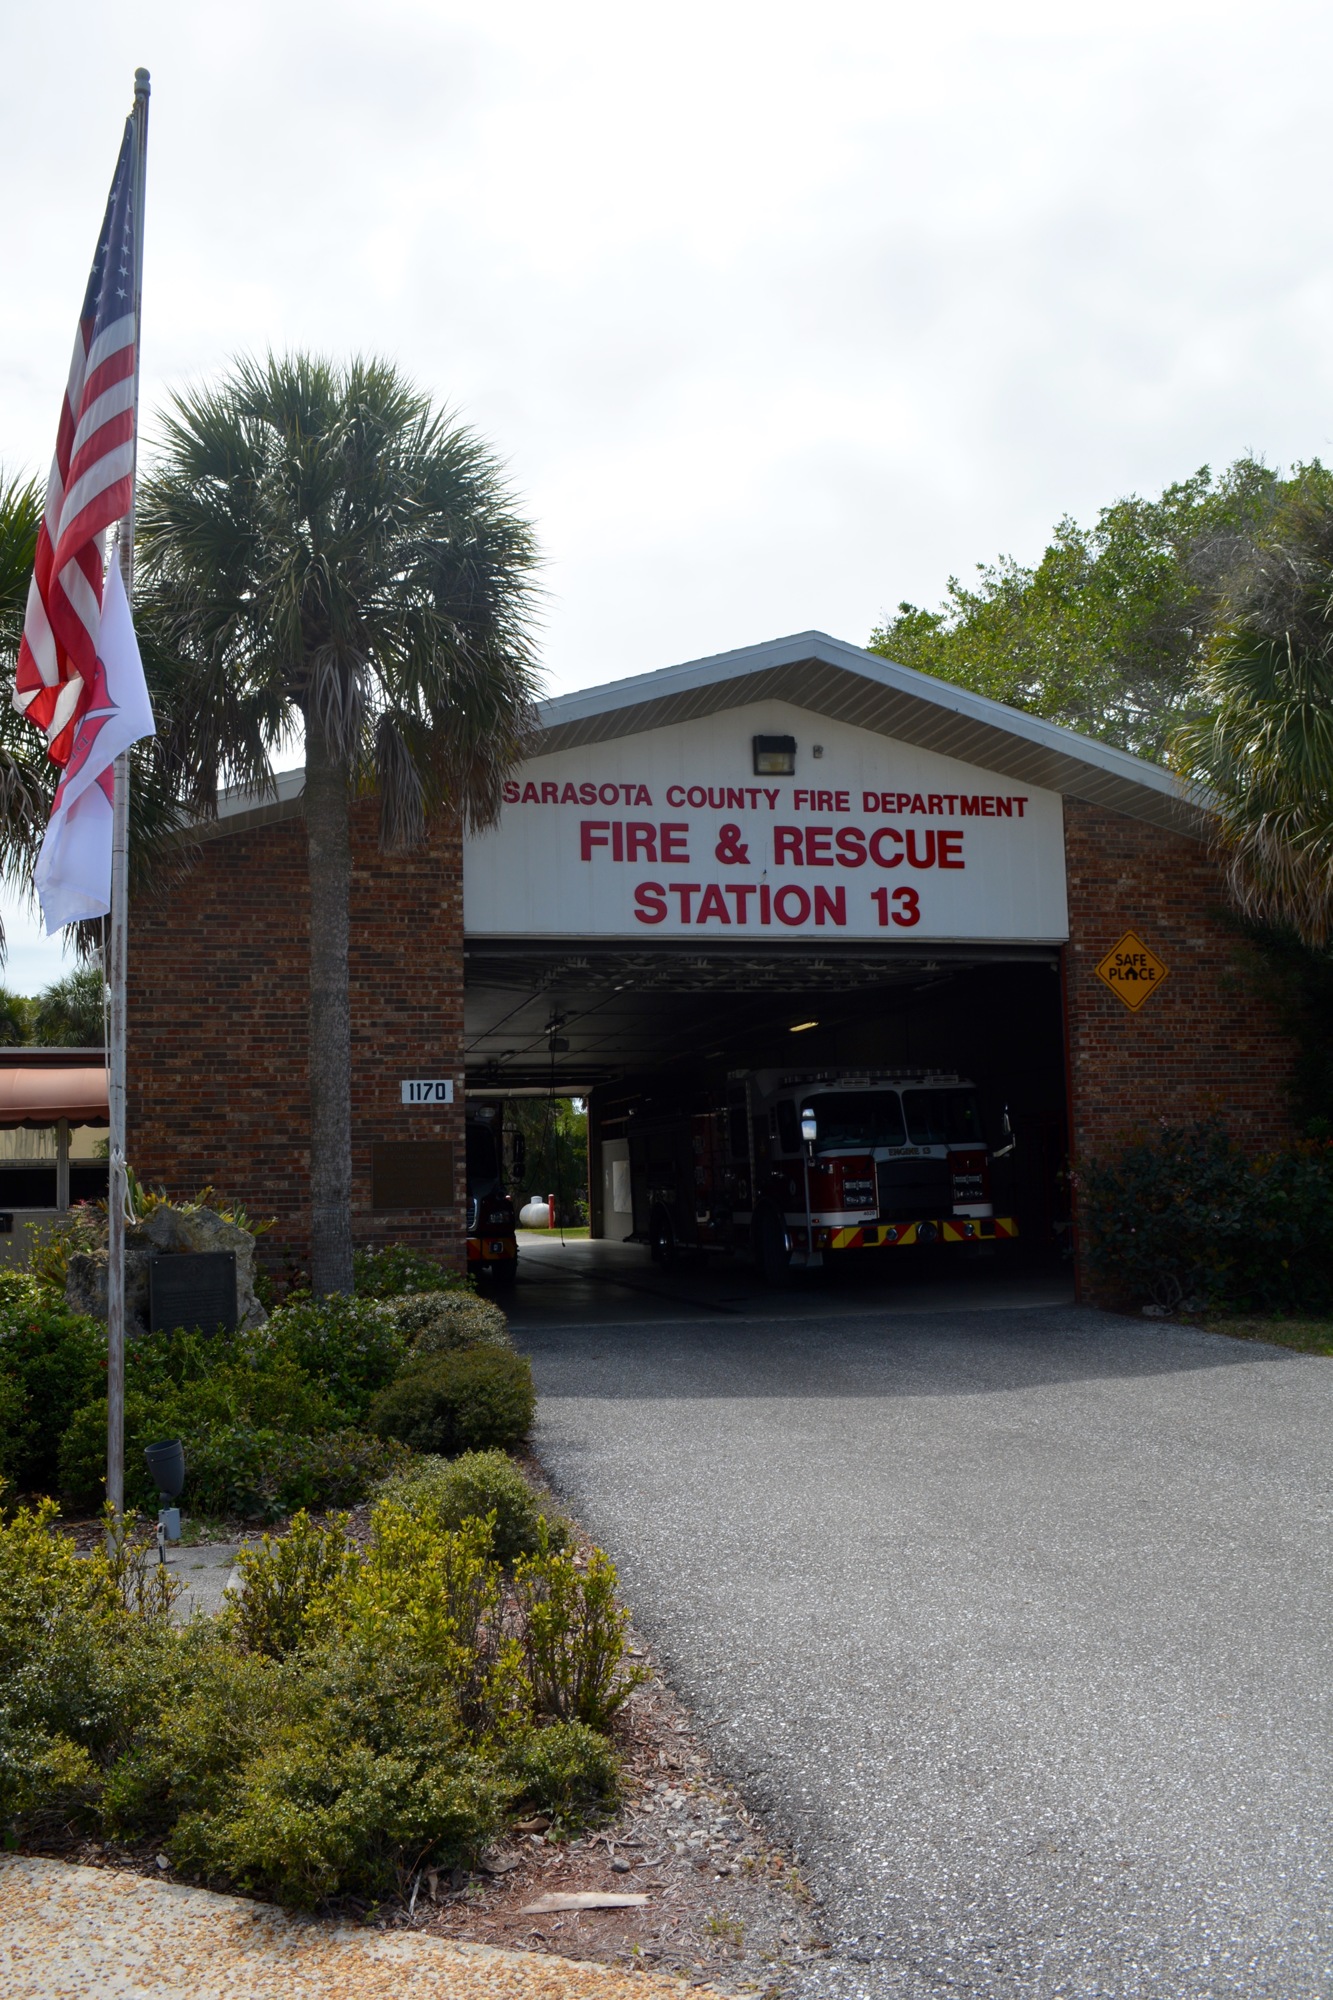 Station 13 is the Siesta Key-based fire station.